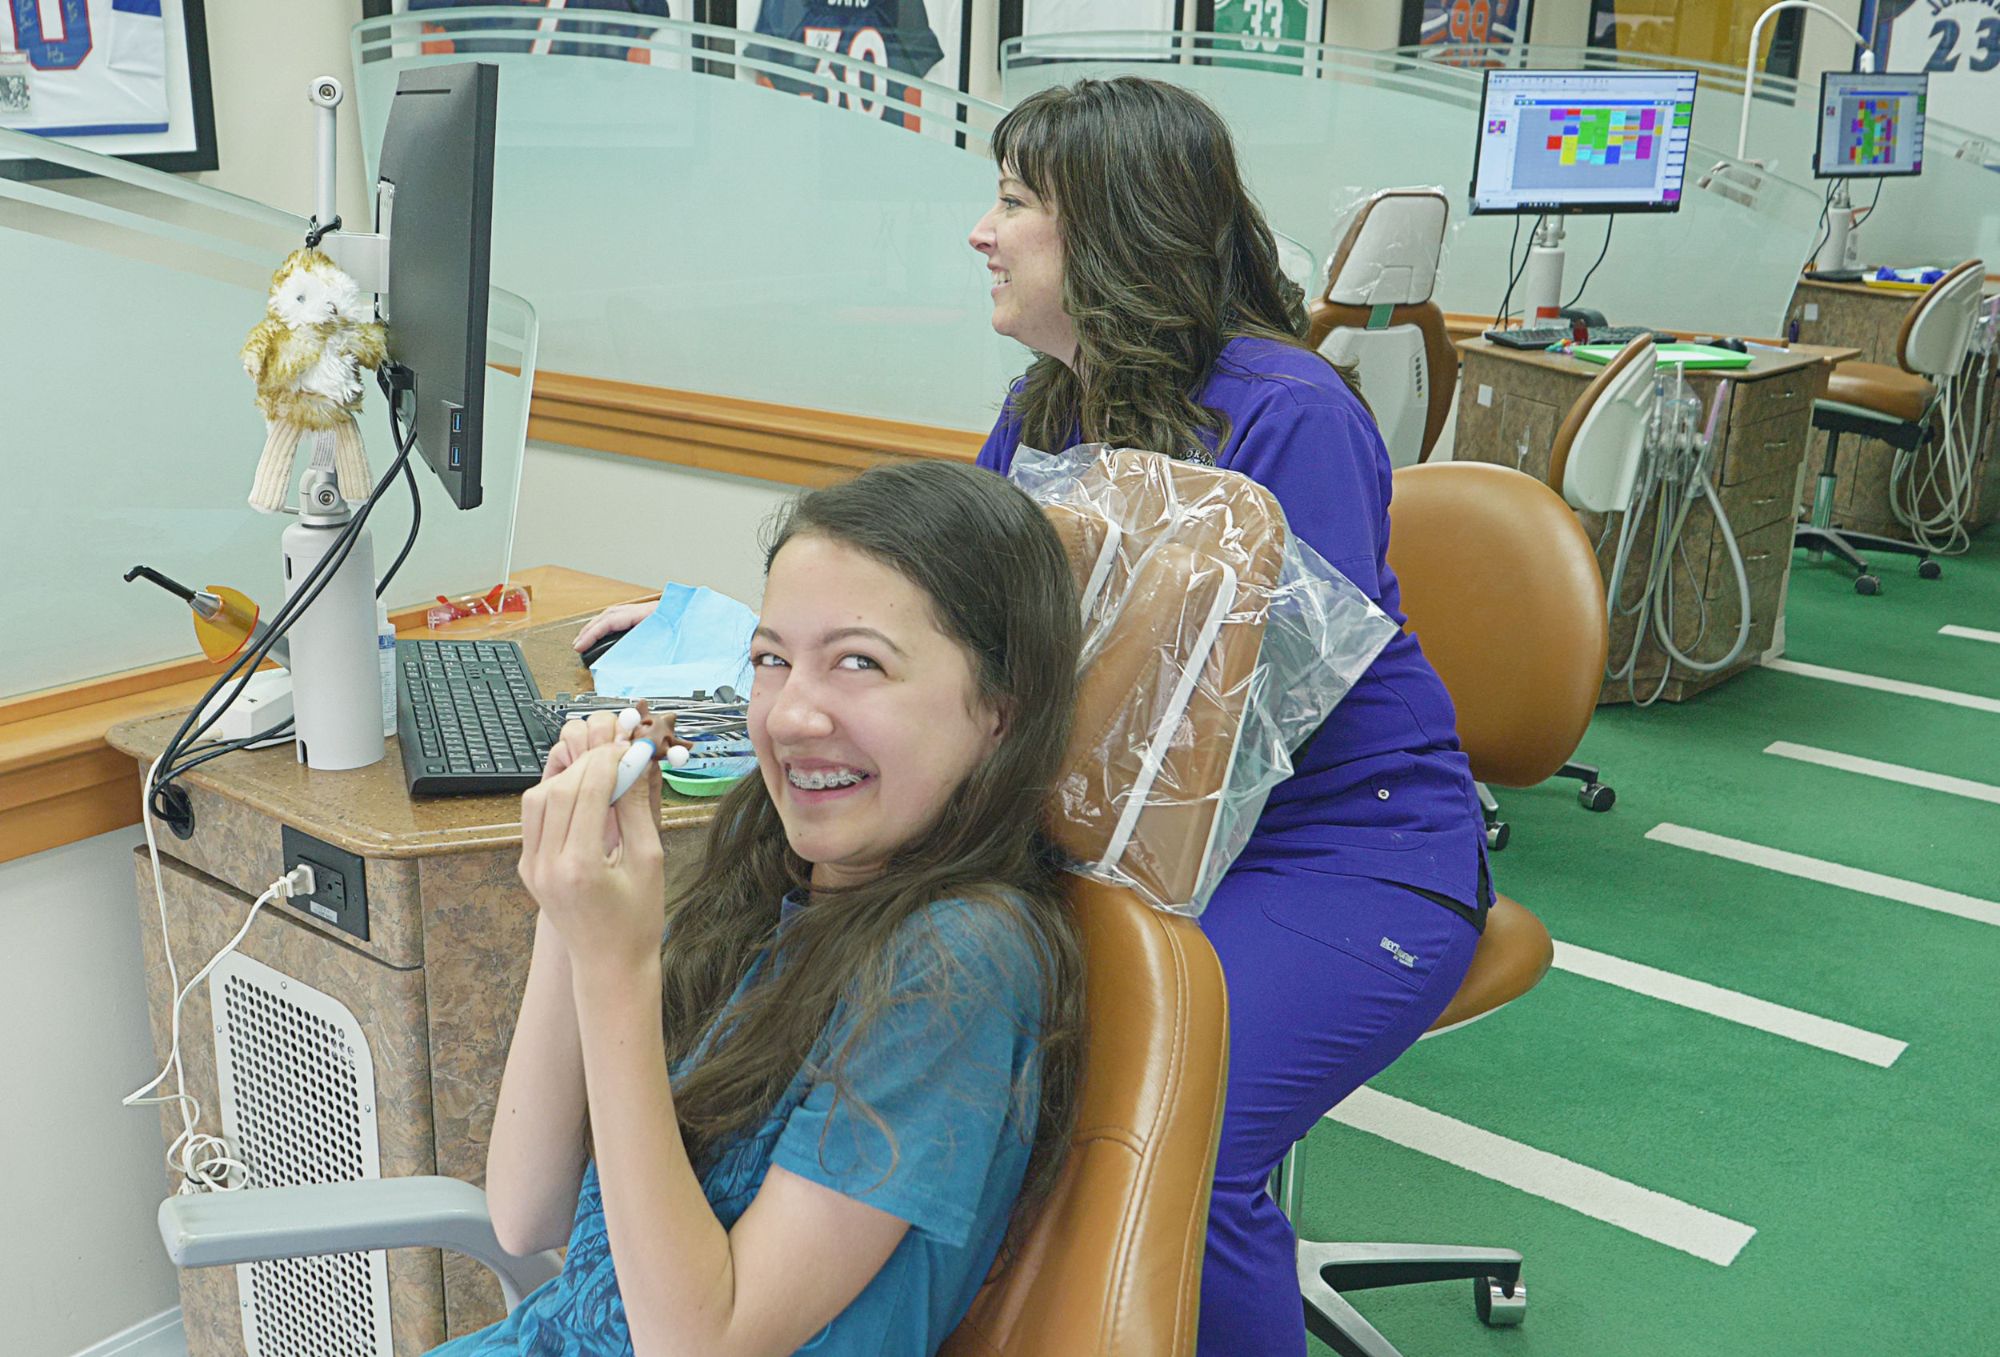 patient with braces smiling in examination chair